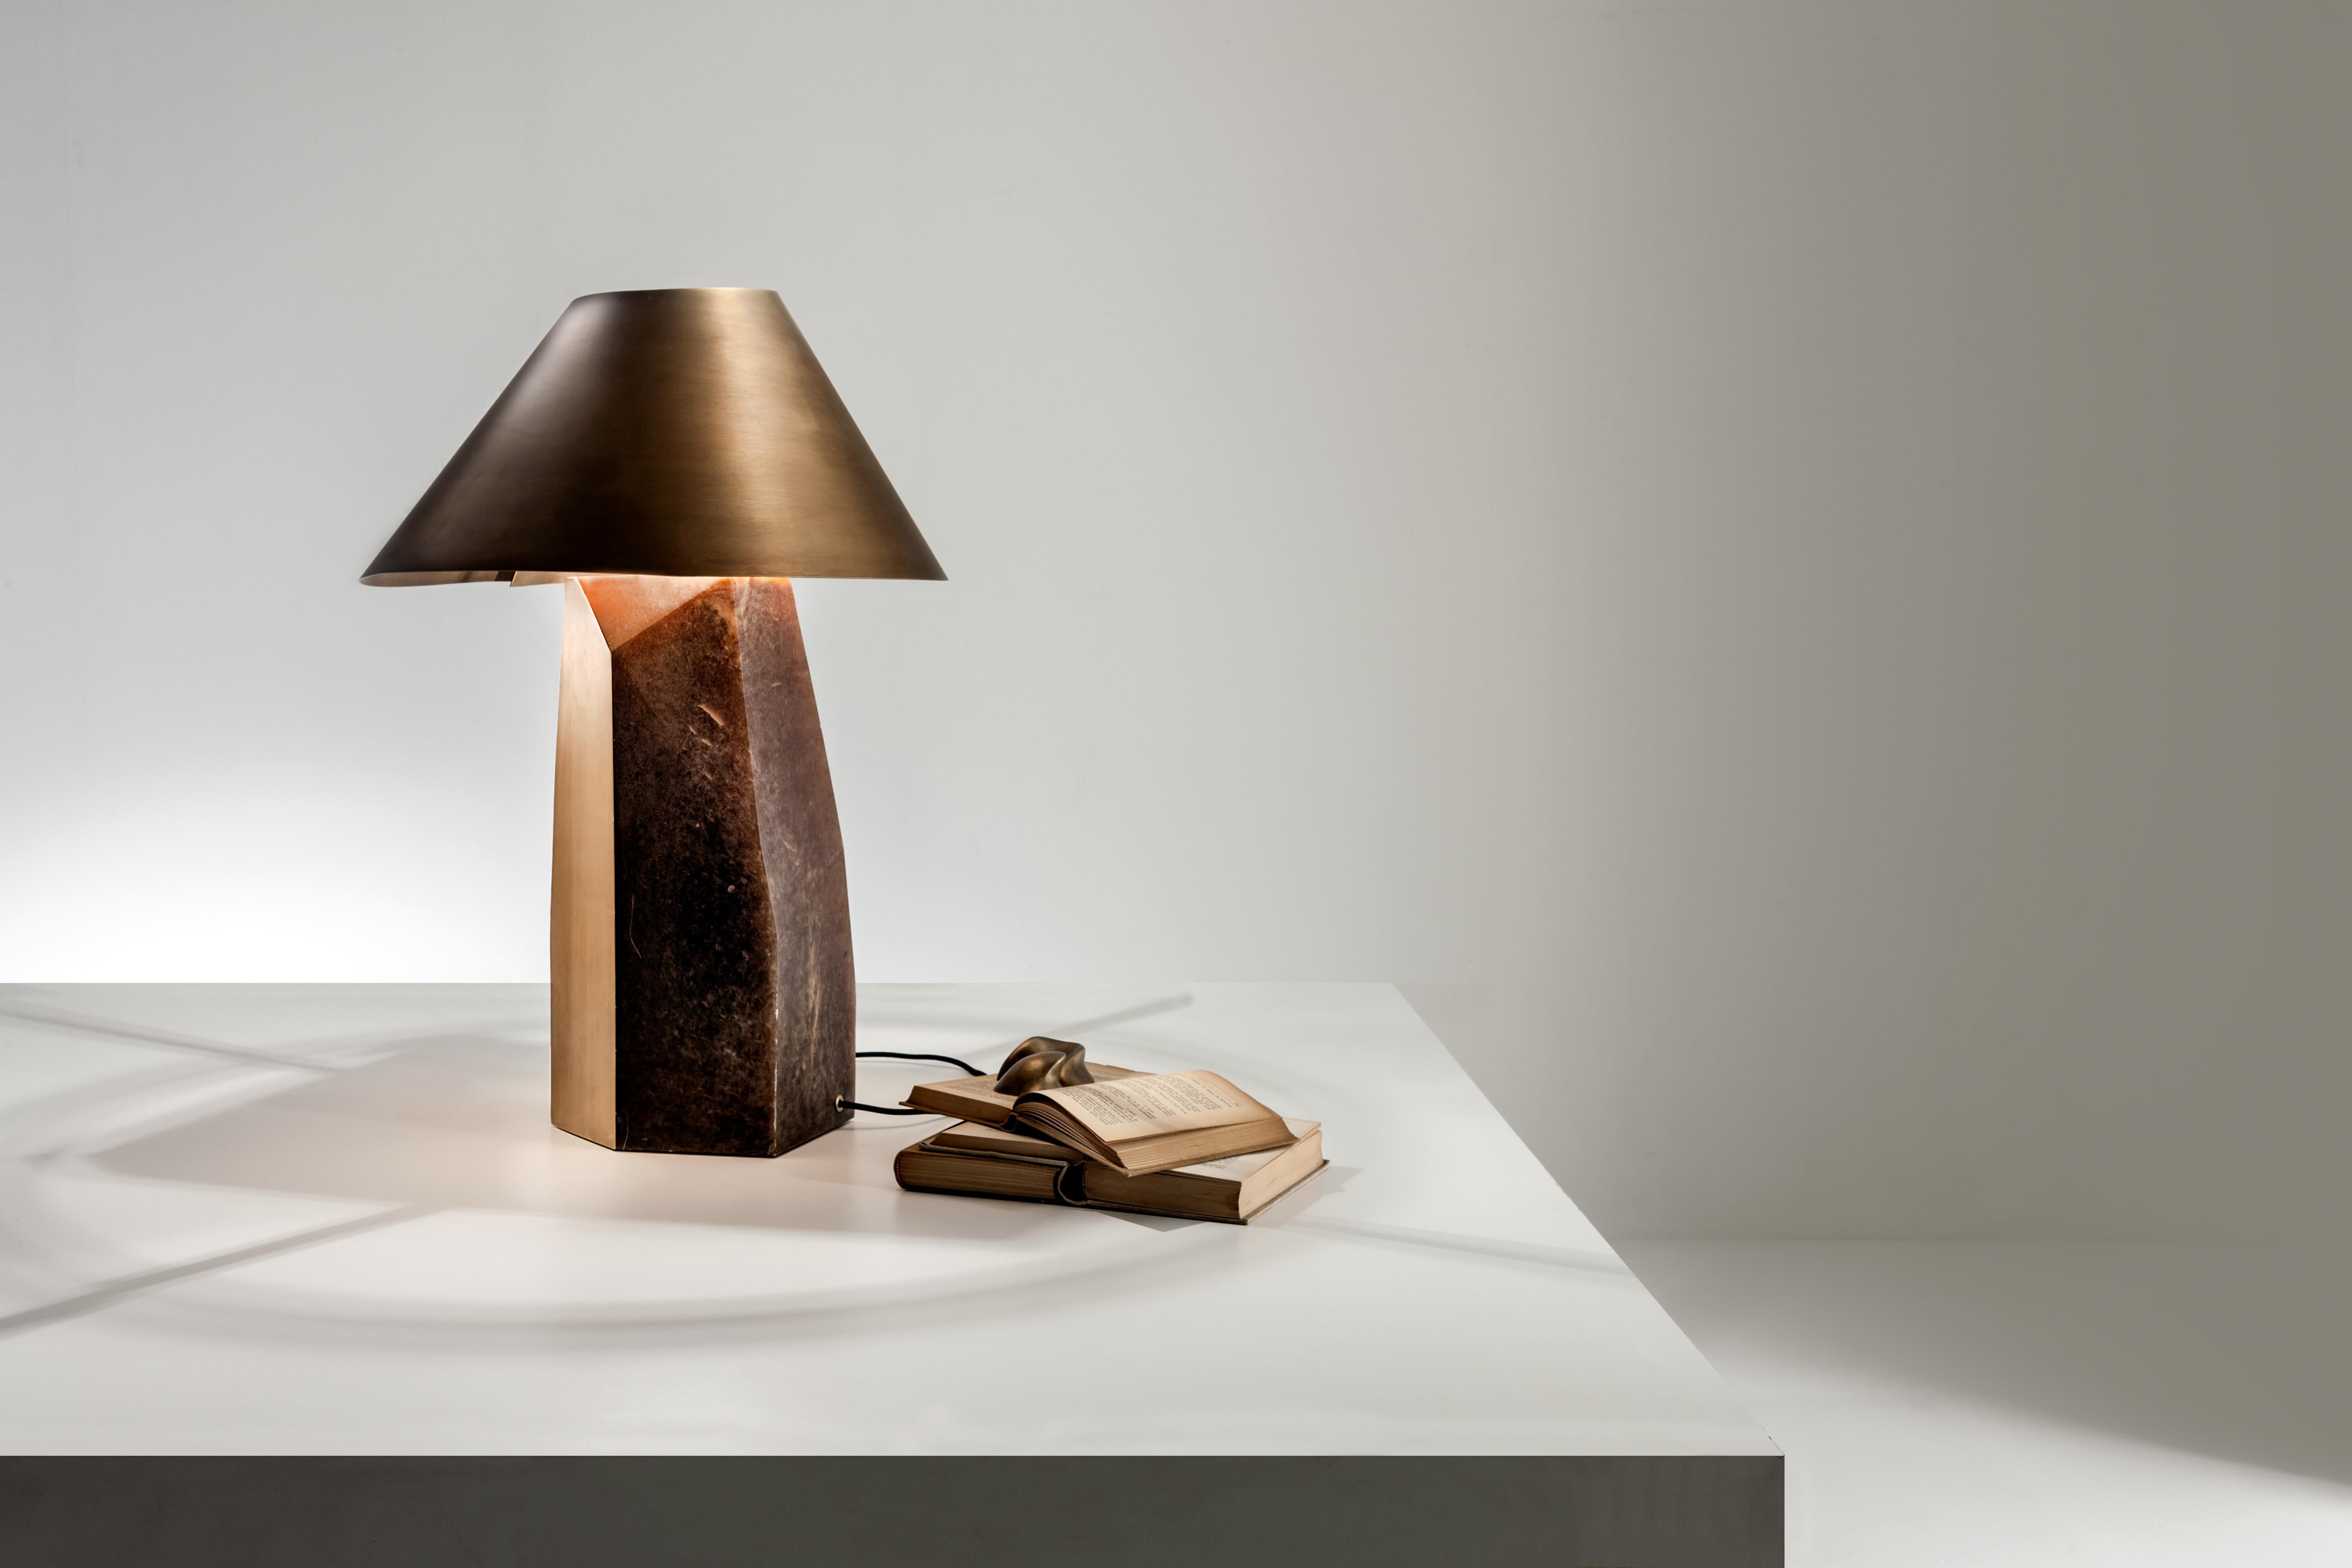 Sculptural table lamp with Alabaster base and burnished brass lampshade. Polyhedral base with a satin brass side and lampshade with a rounded shape and an unusual cutting detail.

FINISH:
Alabaster and burnished brass

Ada is sculptural table lamp